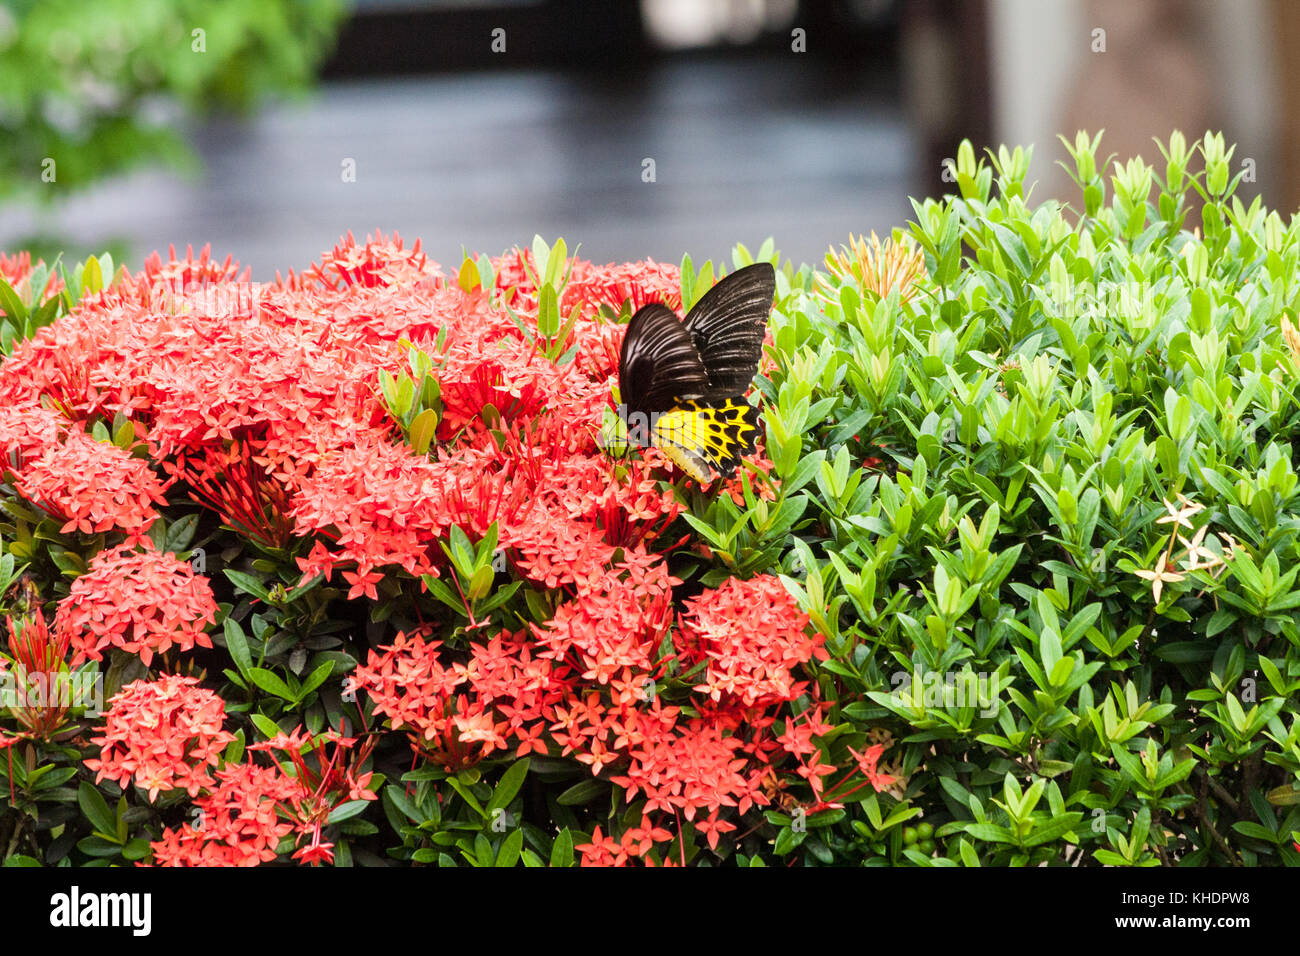 The Common Birdwing butterfly, Troides helena taking nectar from the flowers of Ixora coccinea Stock Photo